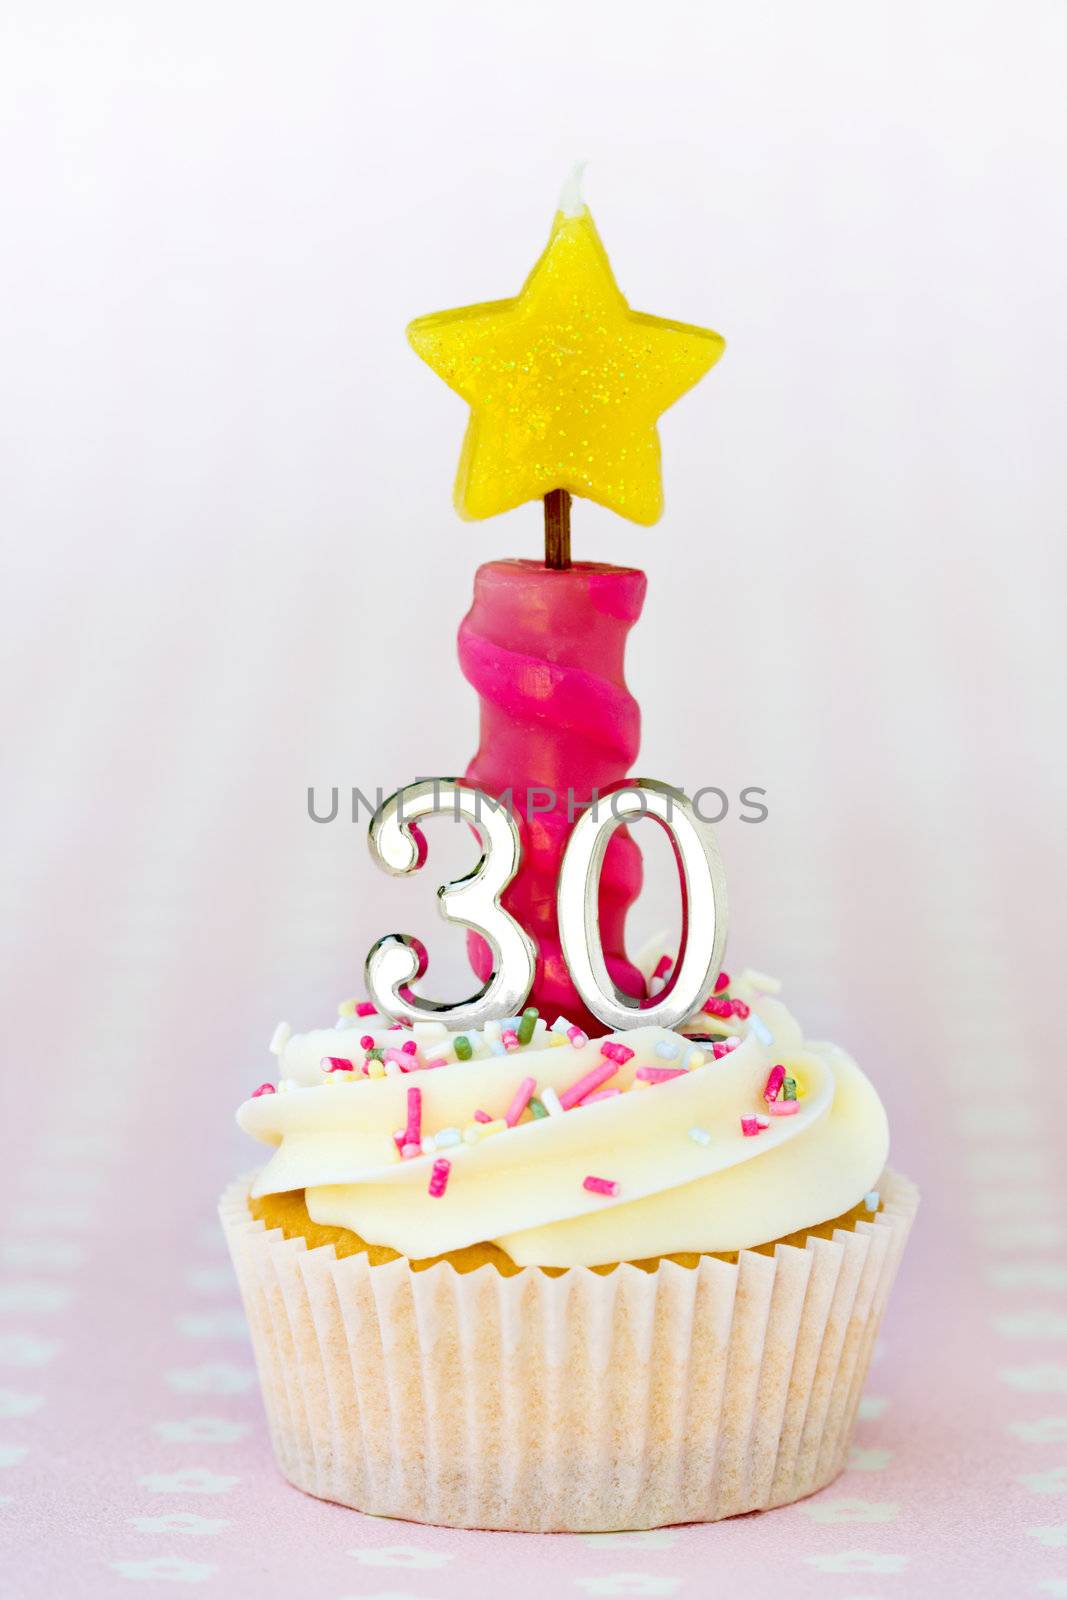 Mini thirtieth birthday cake decorated with a single candle